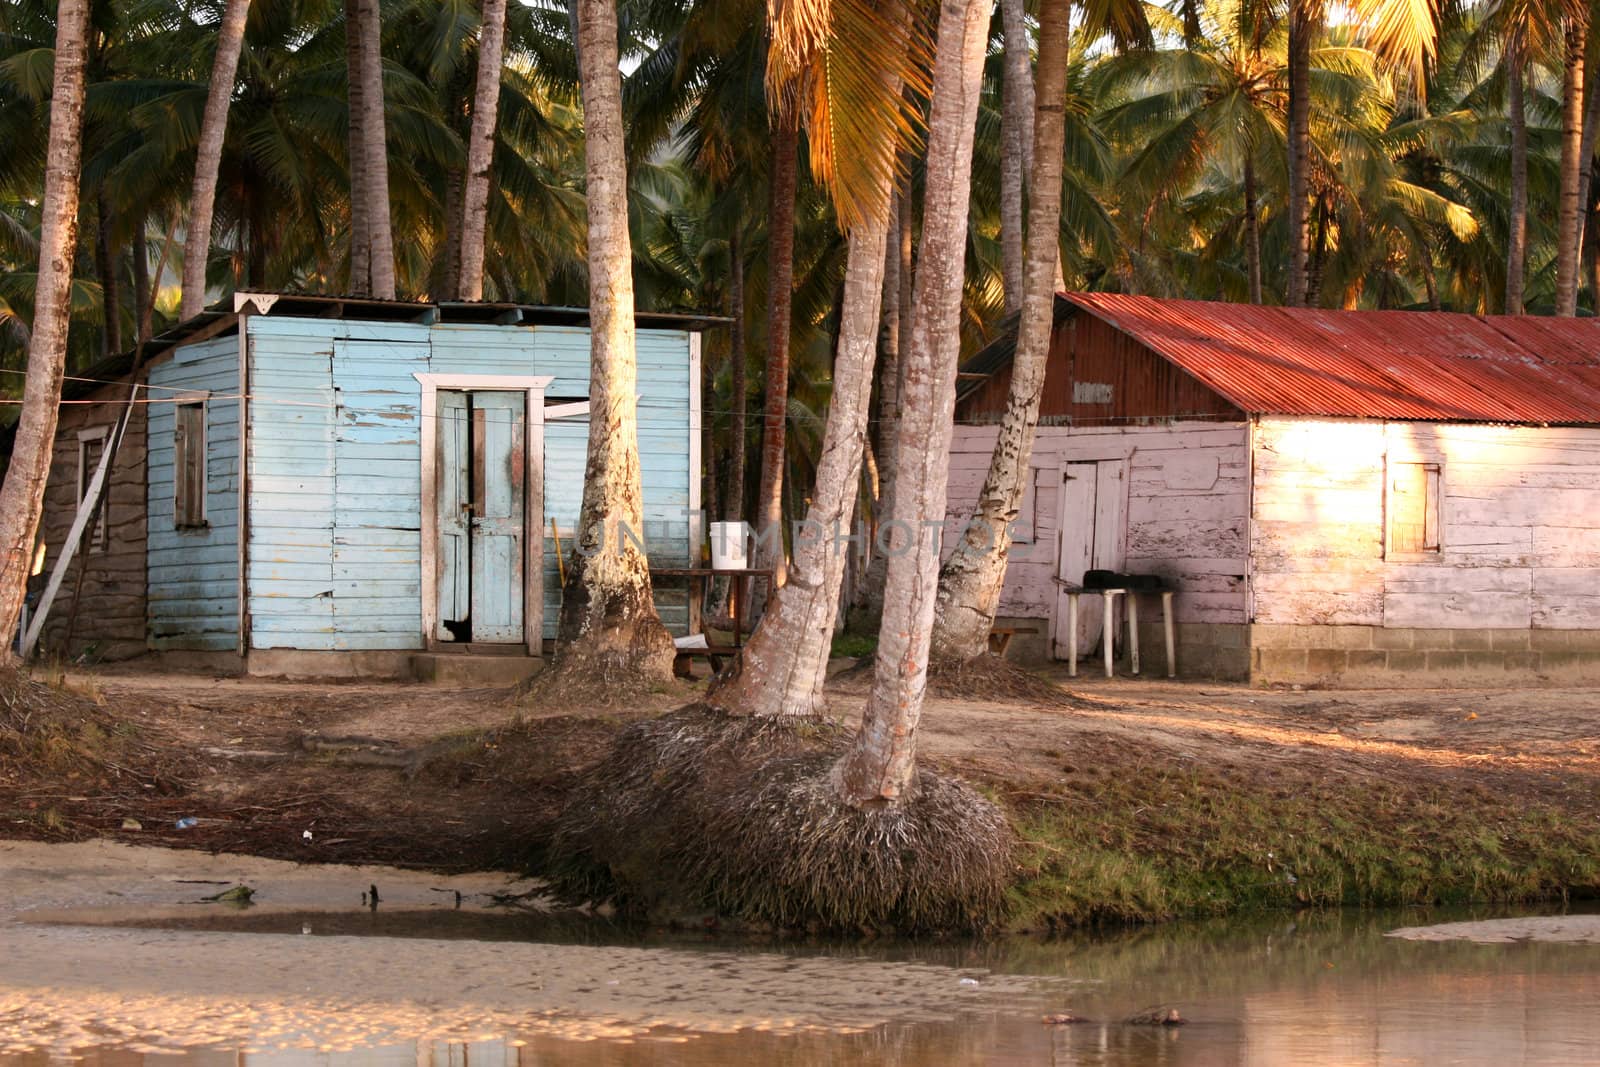 Small fisher house on the beach in the caribbean